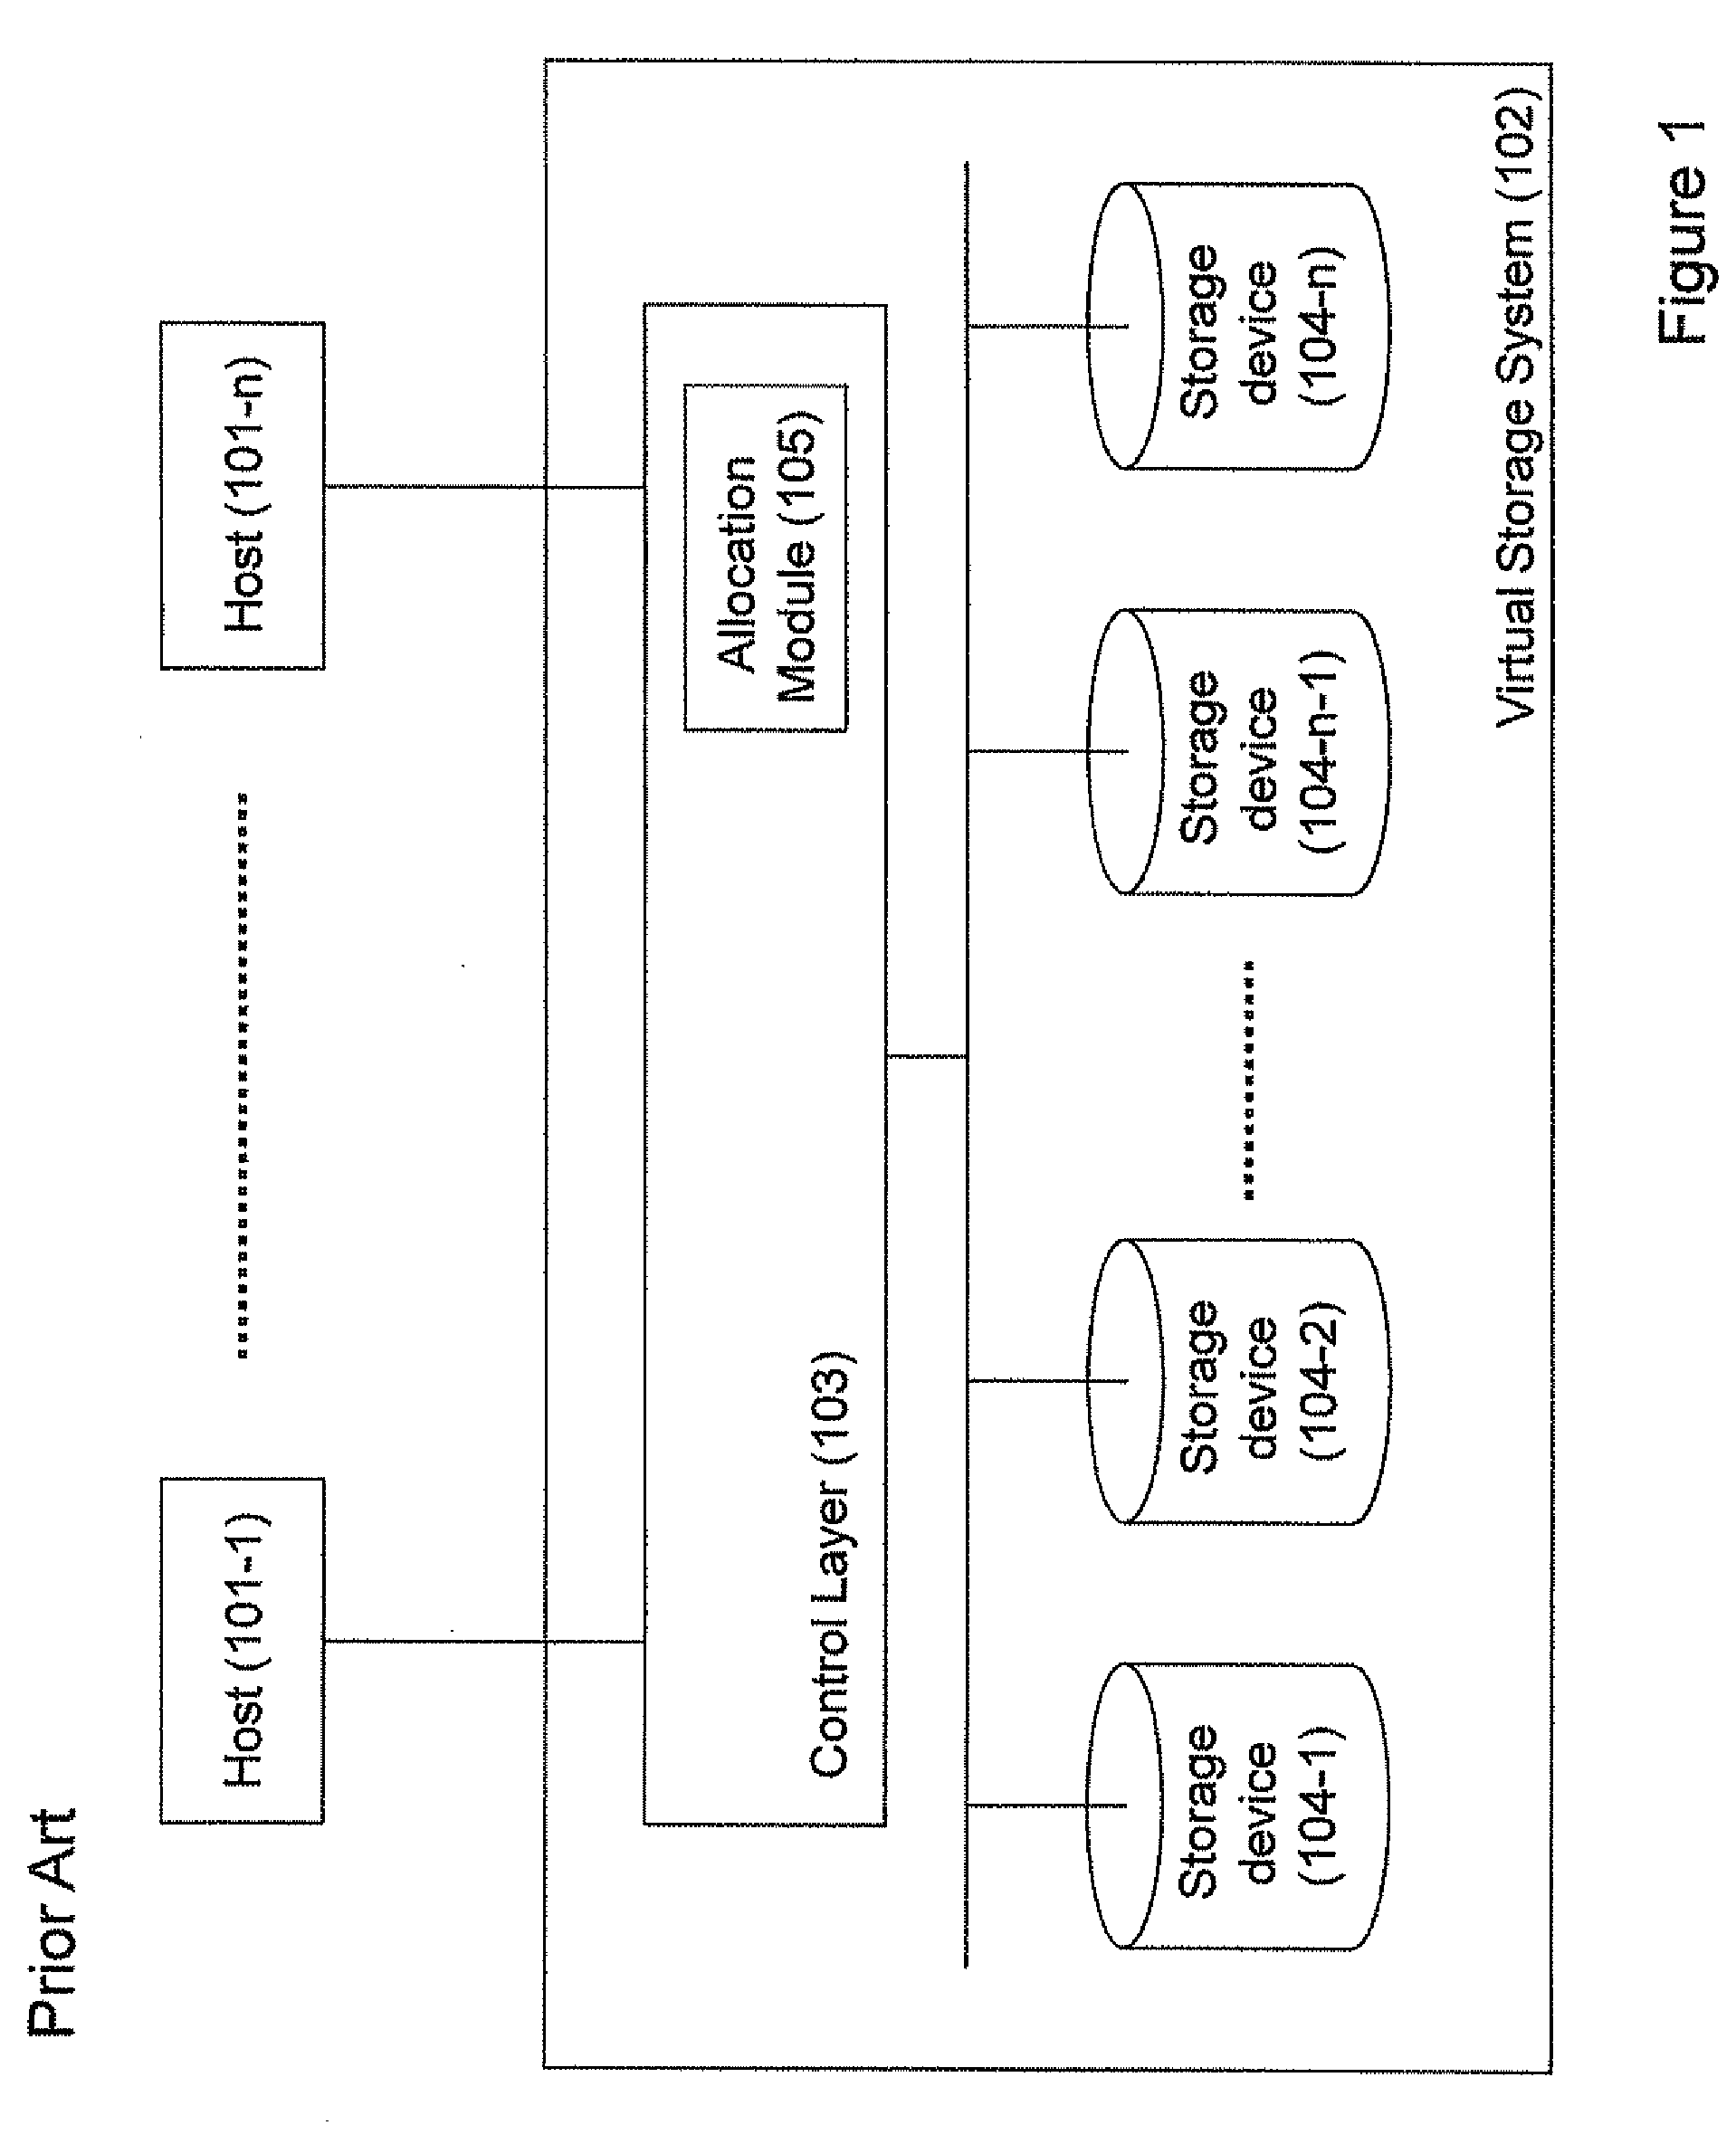 Virtualized storage system and method of operating thereof